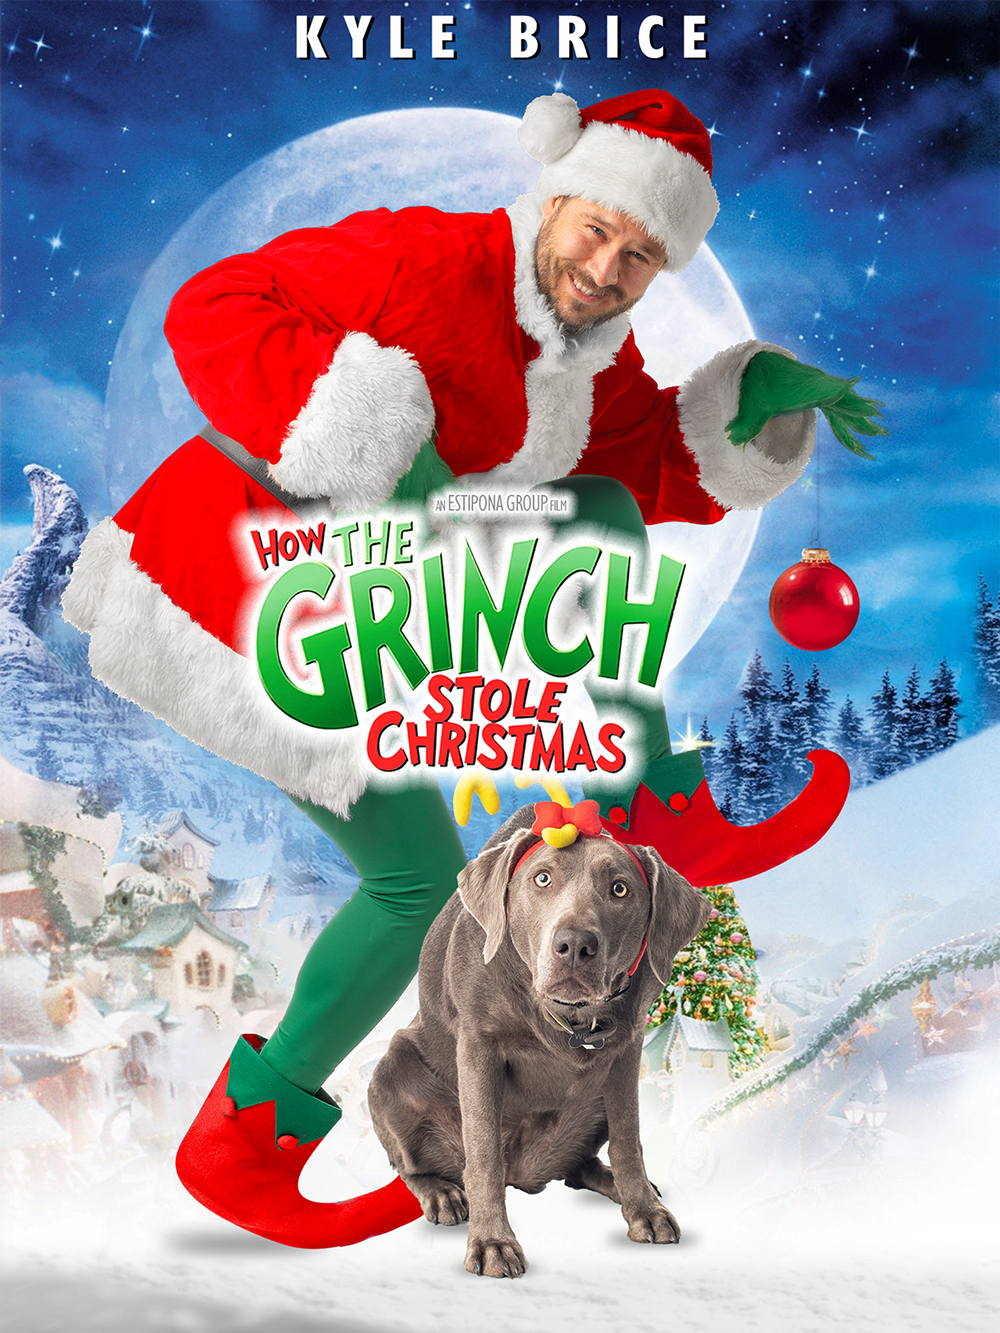 Estipona Group Christmas Card - How the Grinch Stole Christmas Featuring Kyle and Wren the Dog